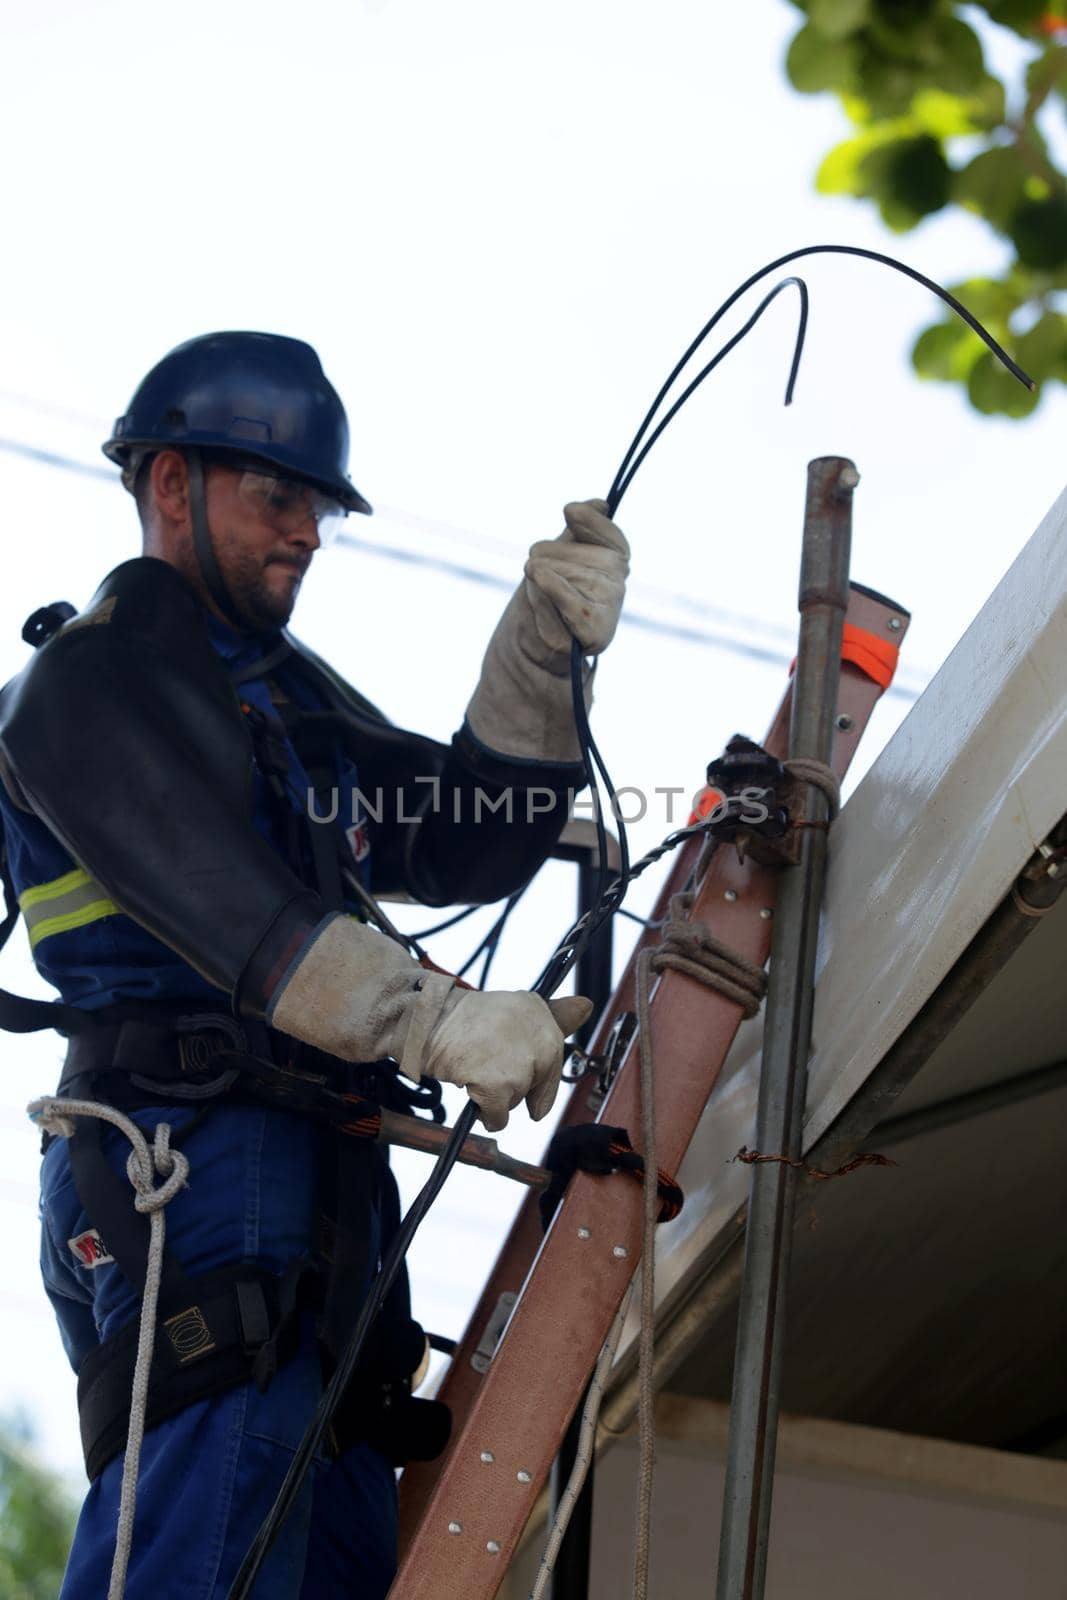 salvador, bahia, brazil - february 28, 2019: Electrician works on temporary connection in electrical network in Salvador city.